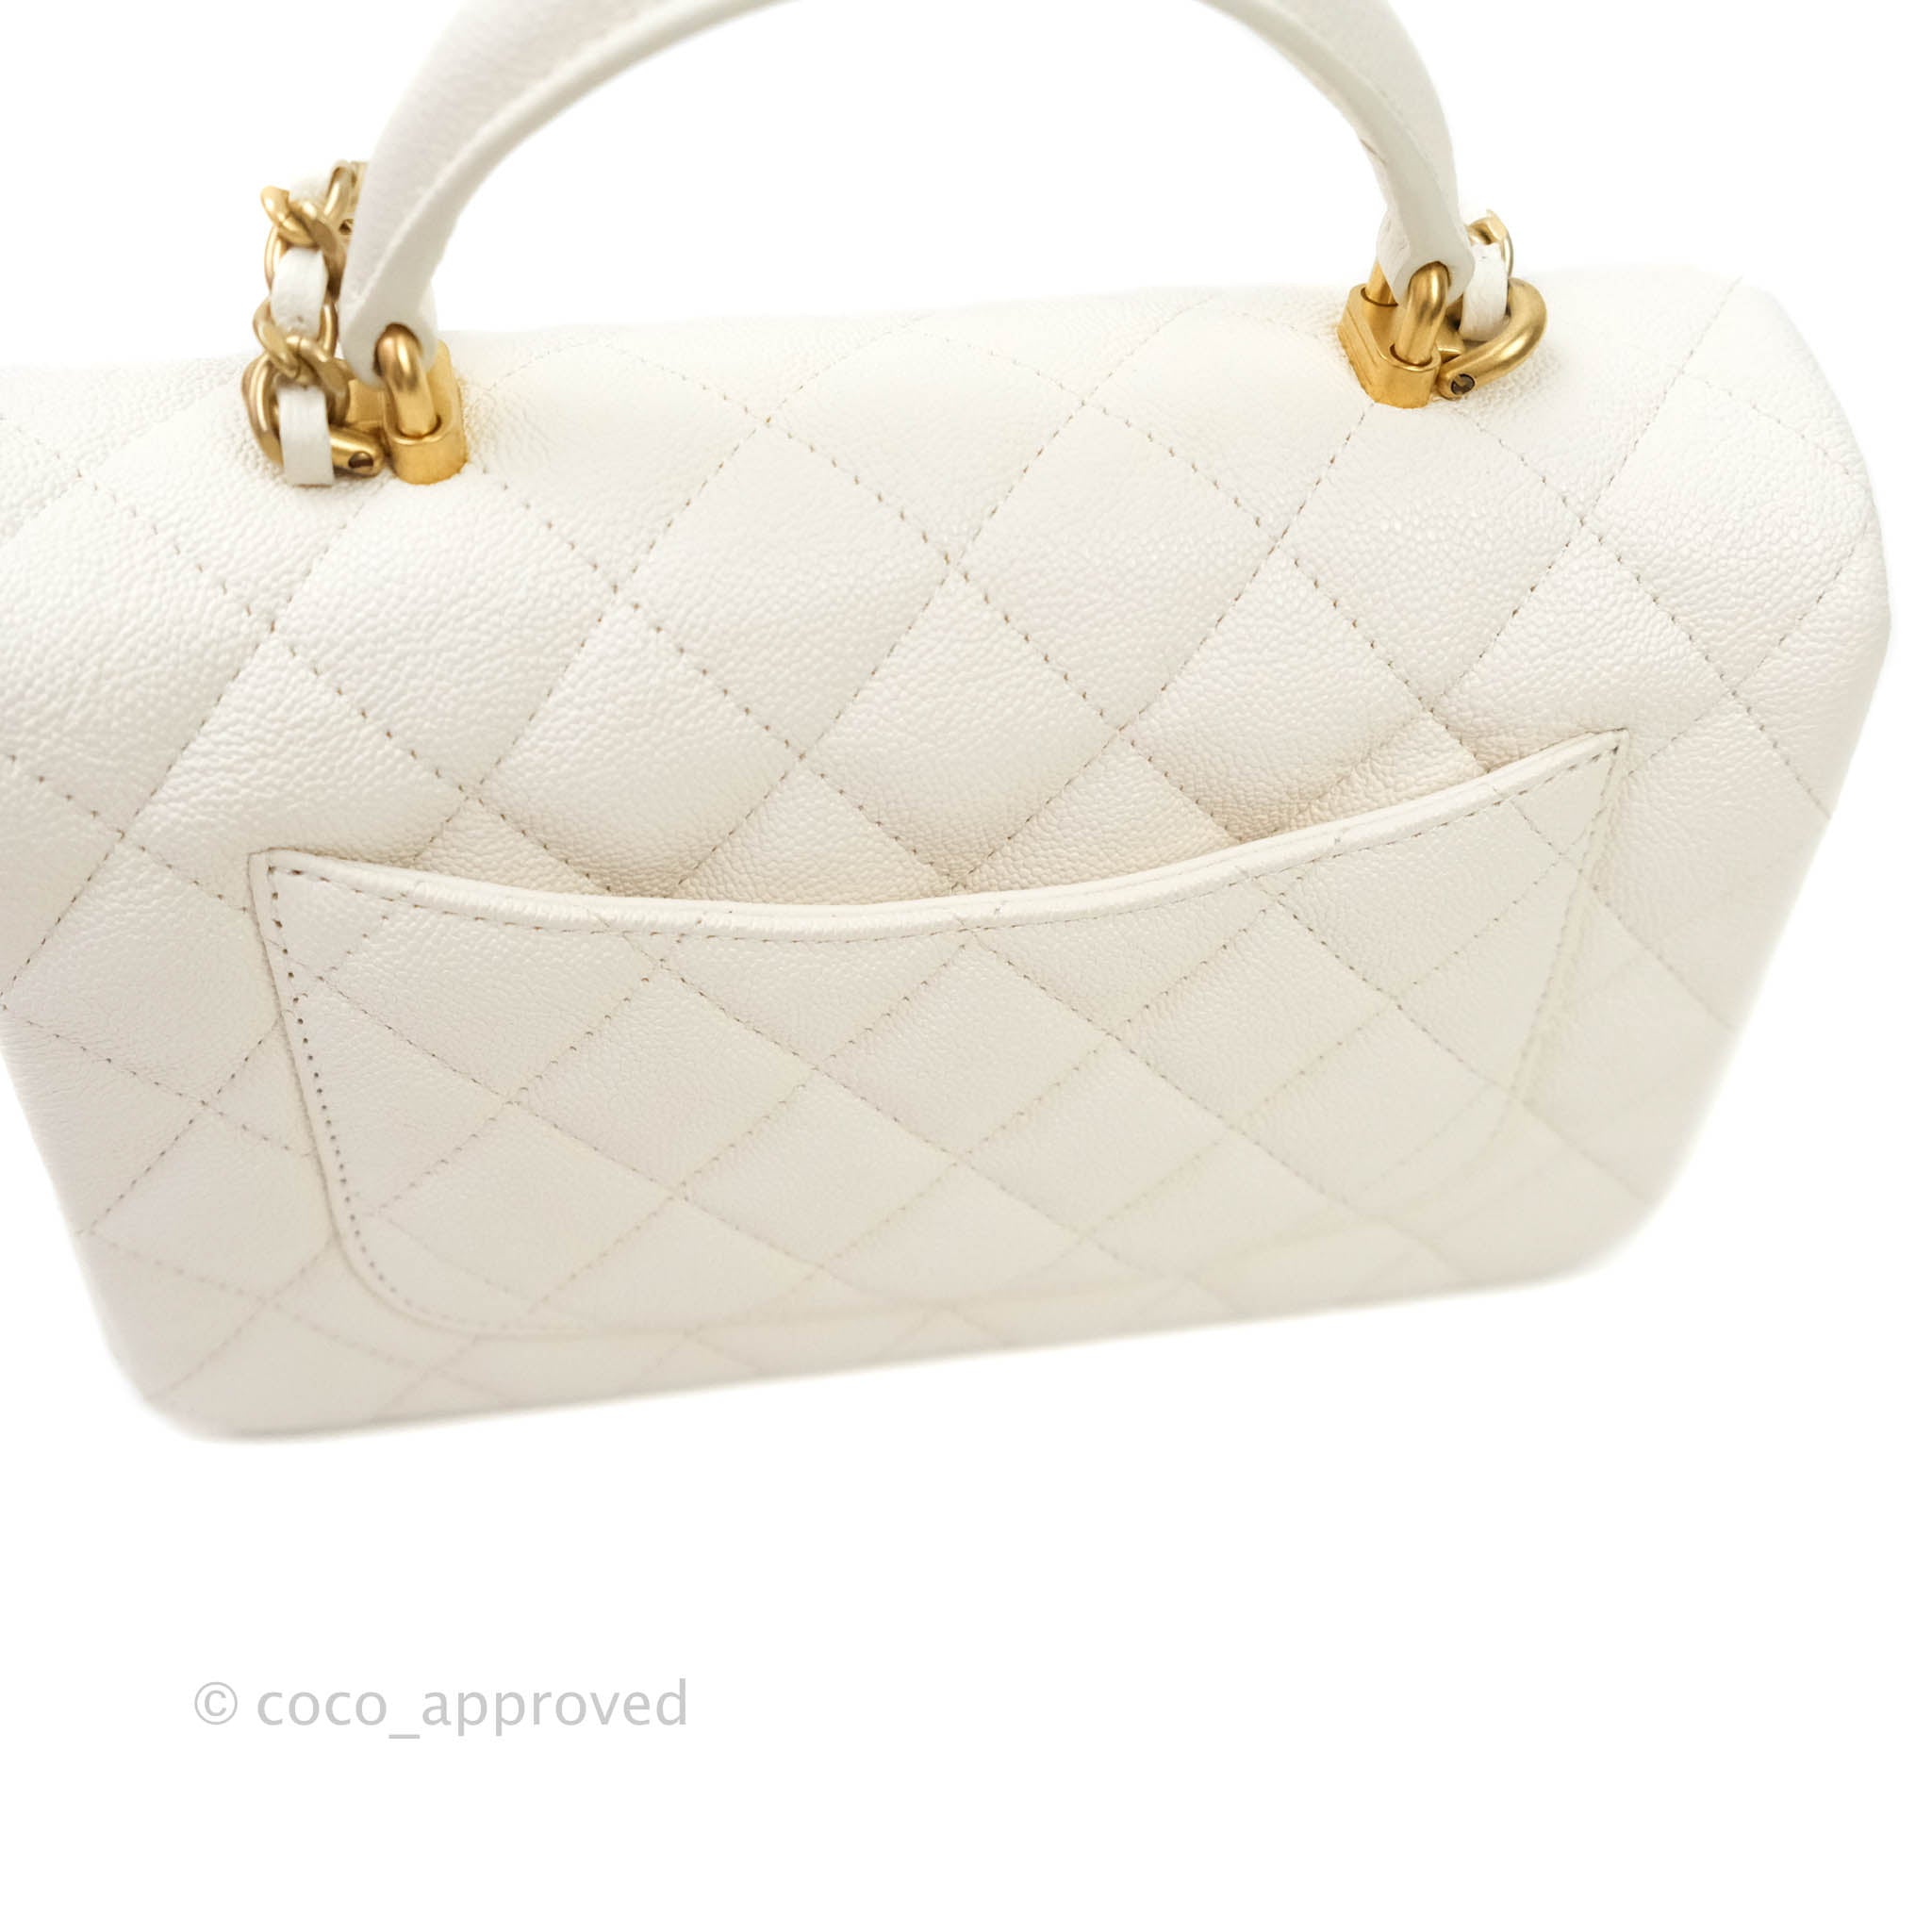 Chanel | Flap Bag with Top Handle